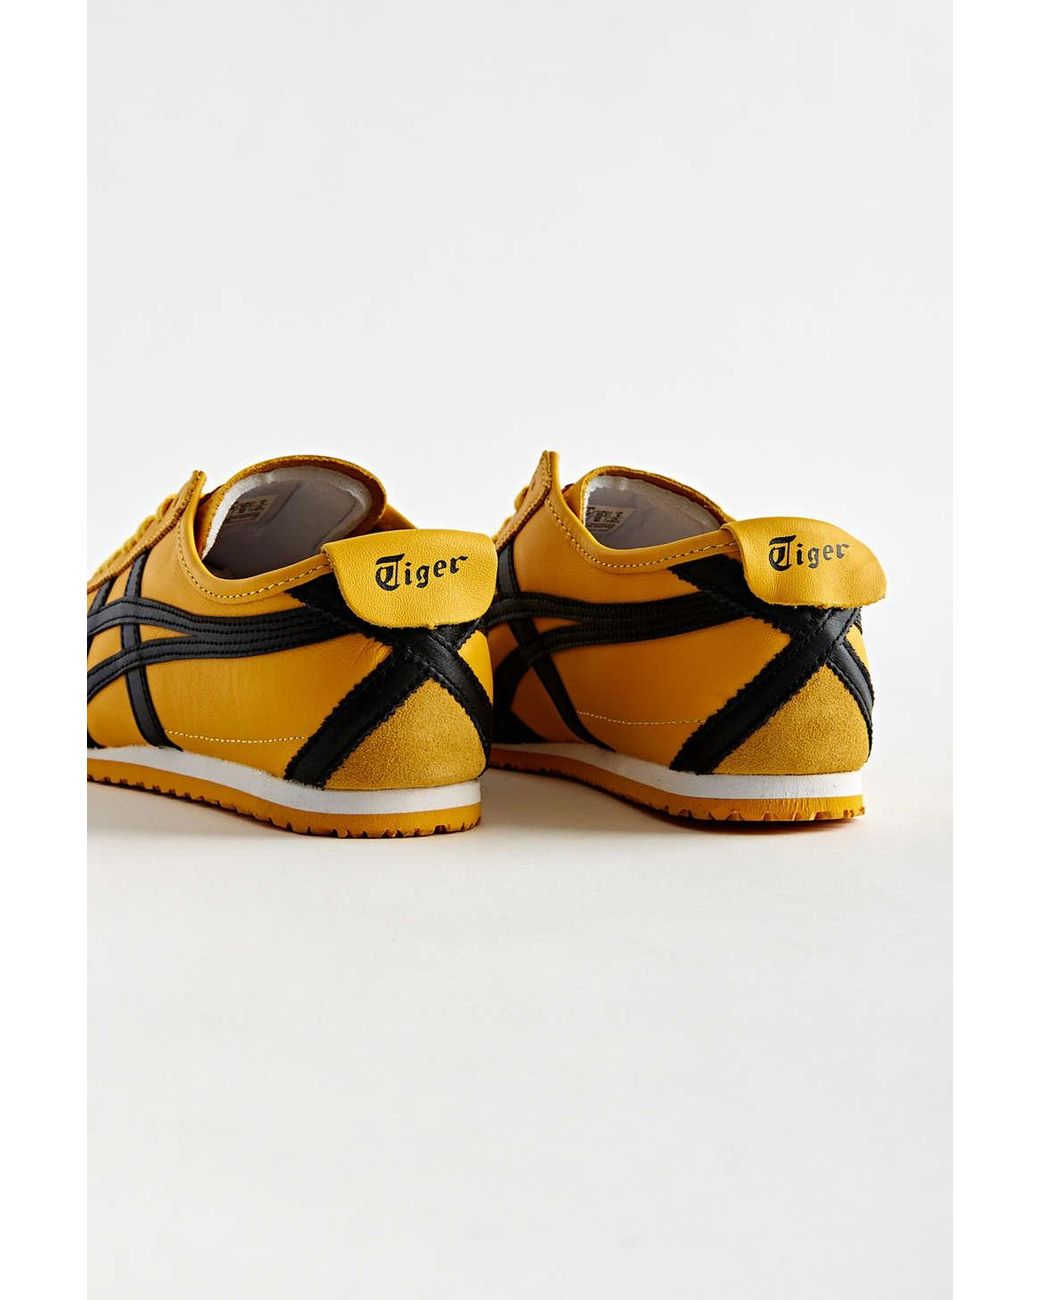 Details more than 118 onitsuka tiger yellow sneakers super hot